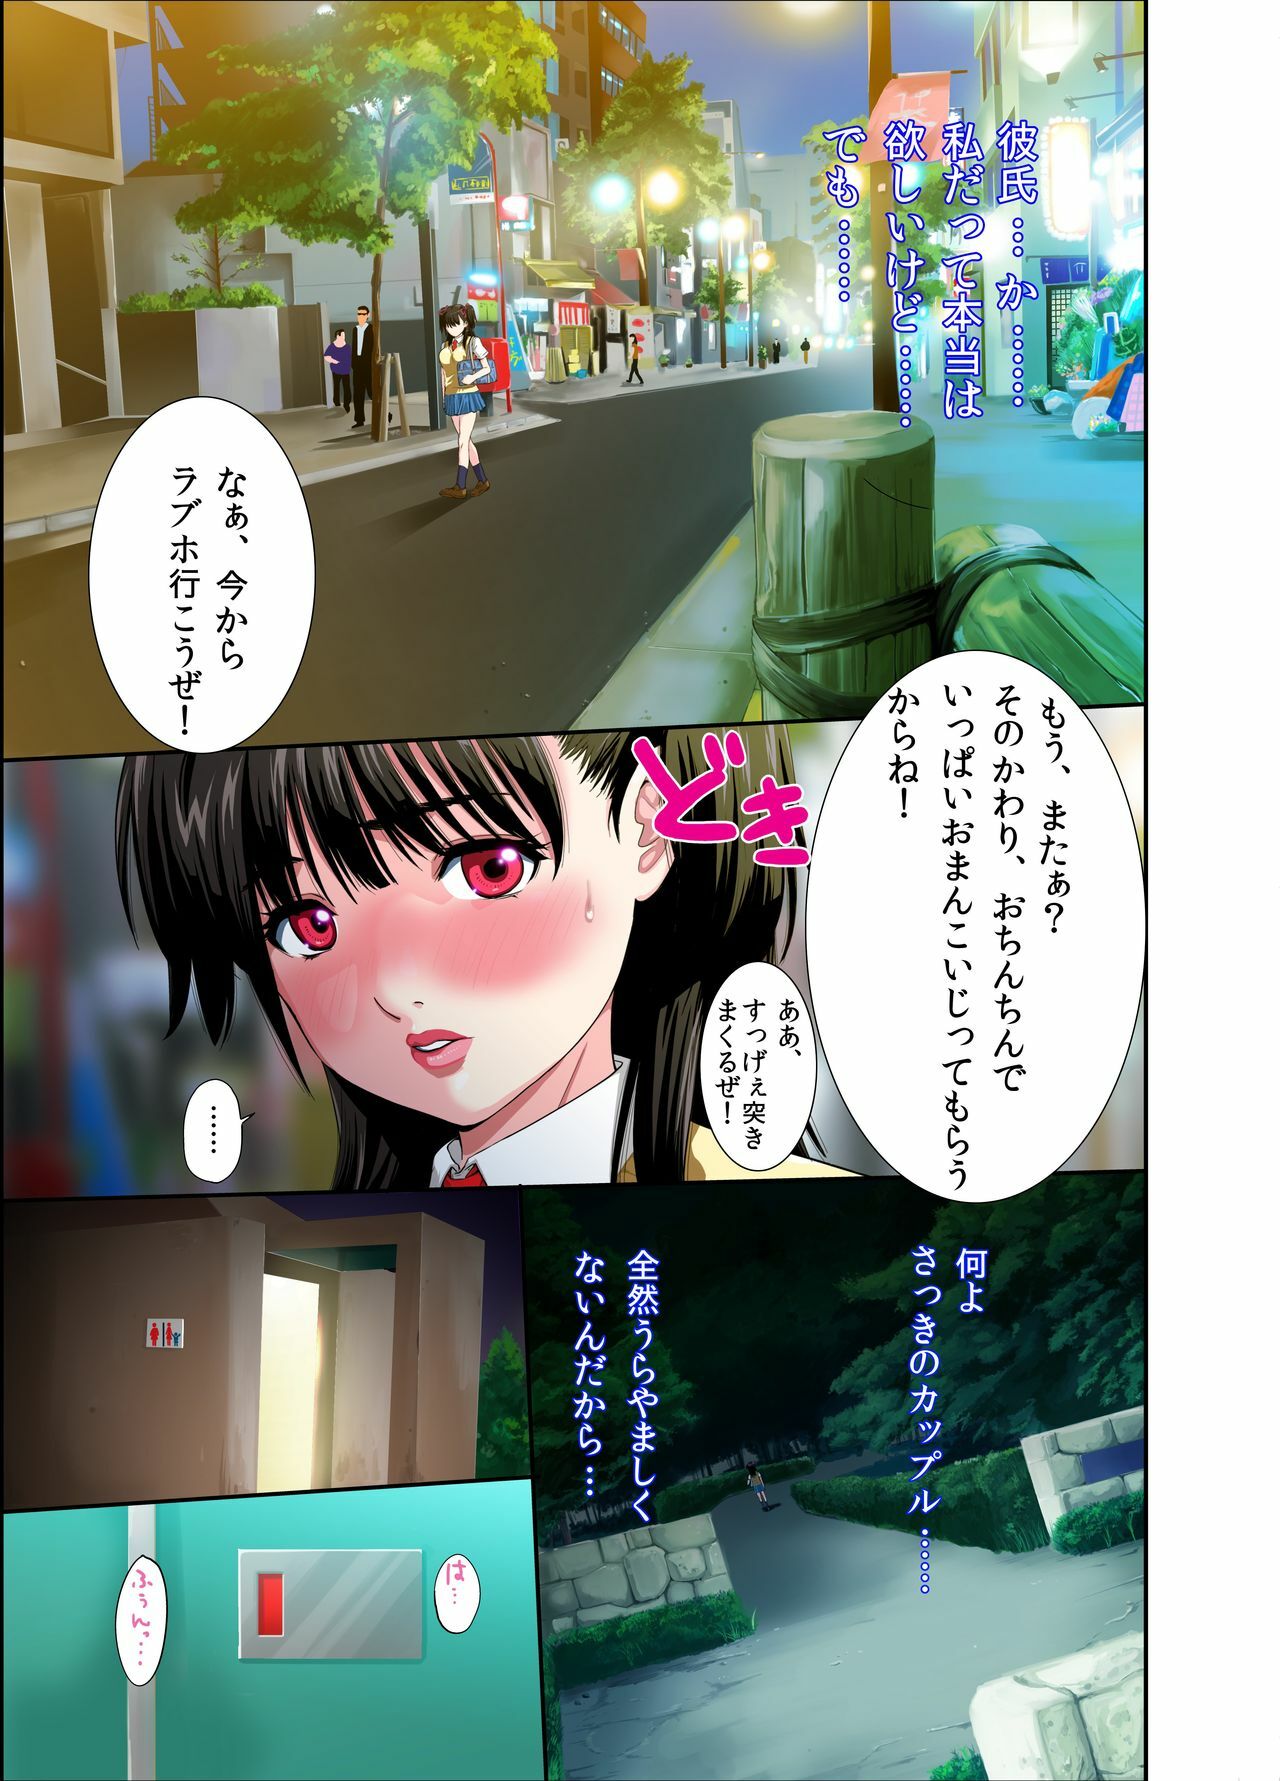 [Abbey Load] Toilet no Anna-chan page 4 full